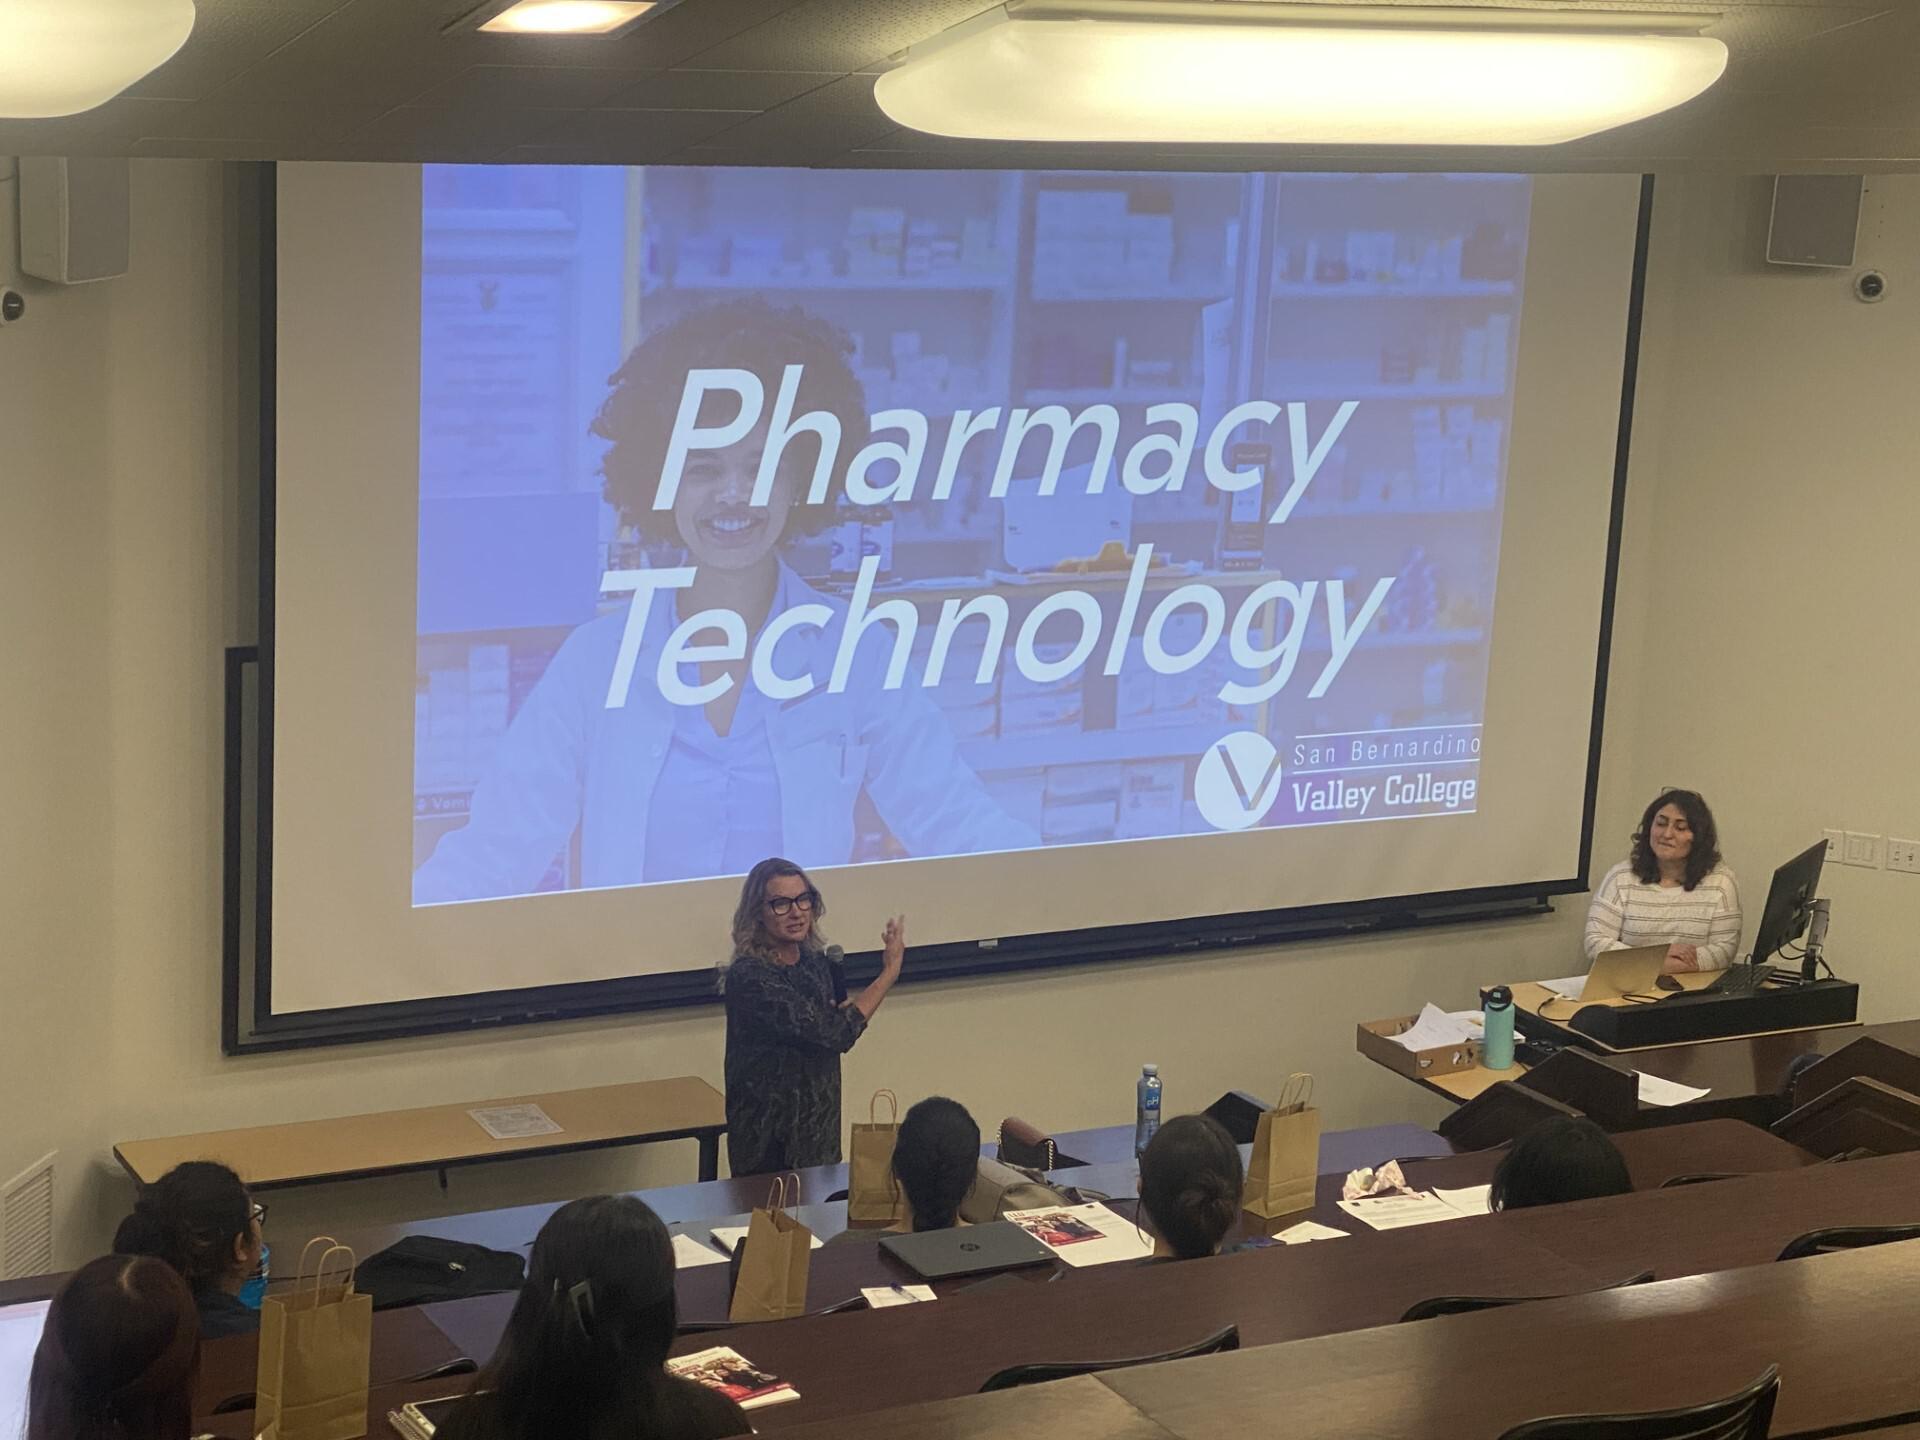 Robyn Seraj presenting information about Pharmacy Technology in front of students